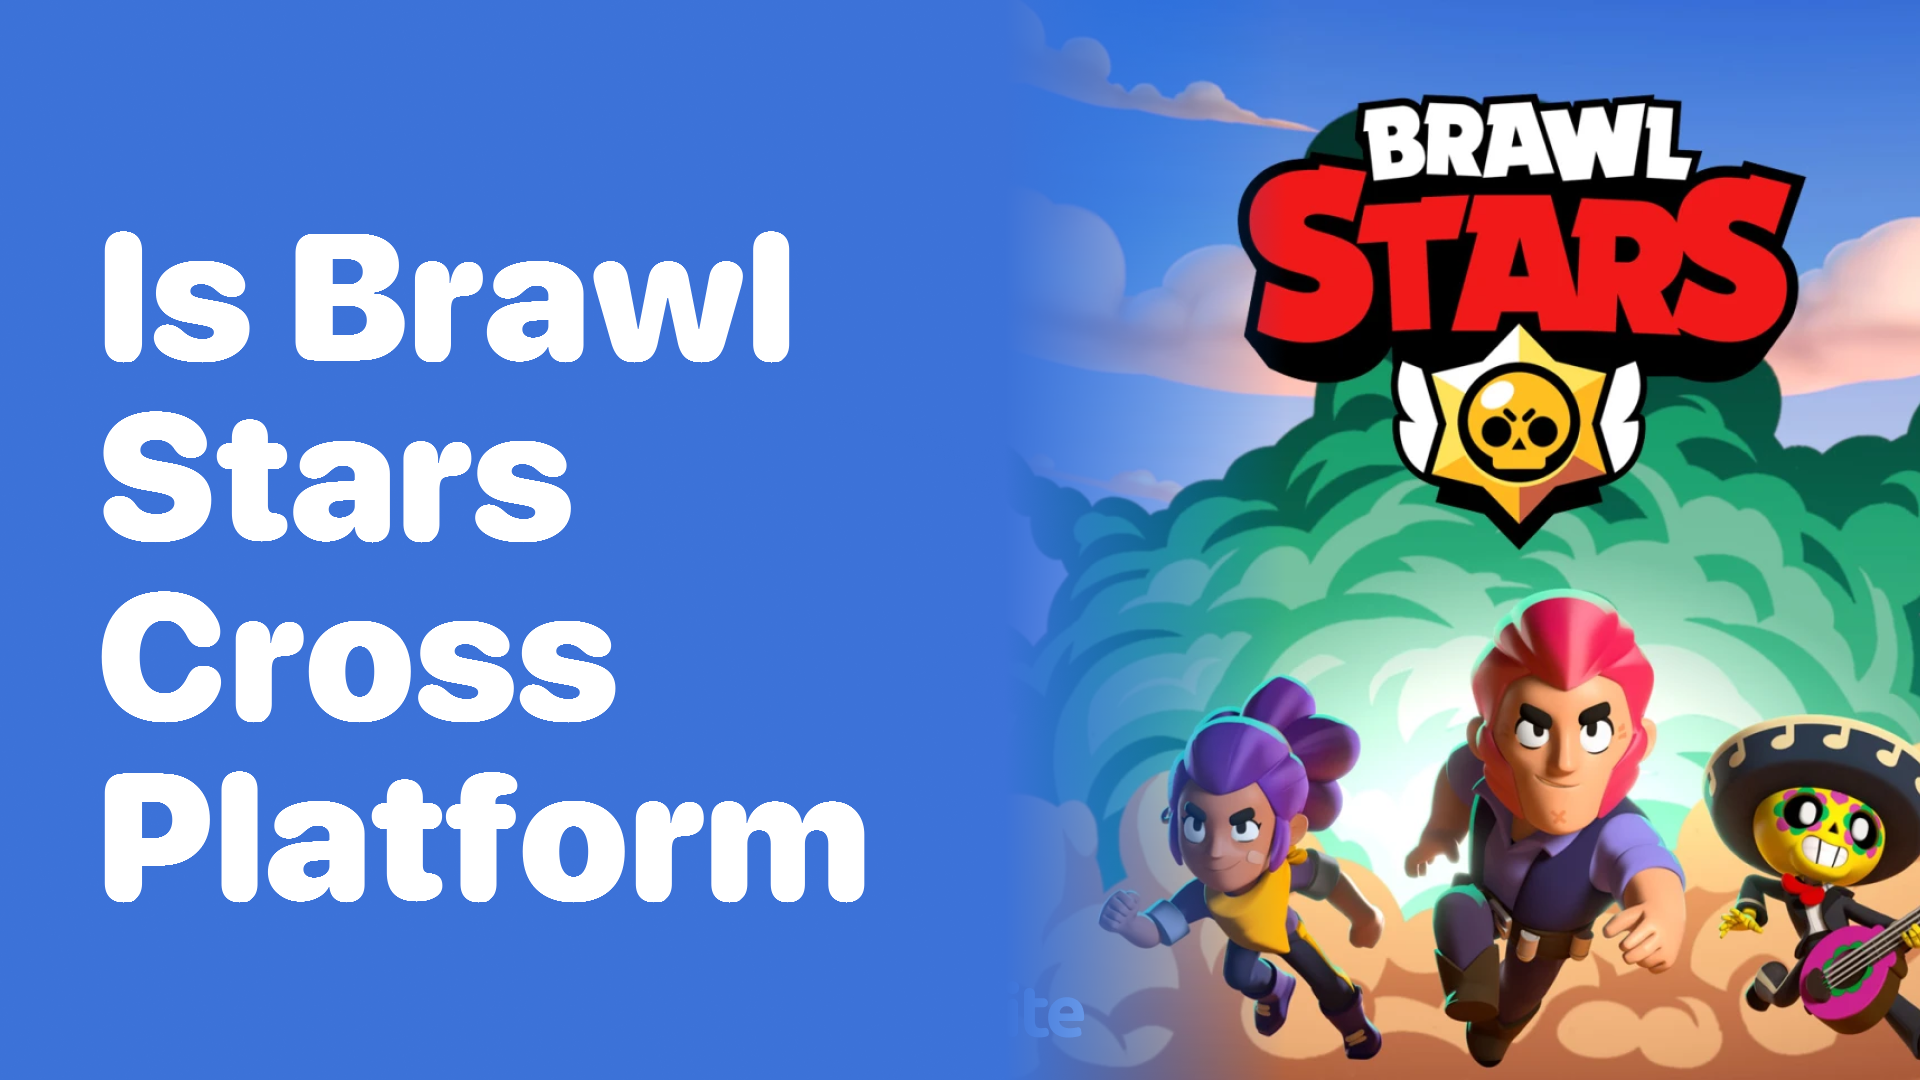 Supercell - Come join the Brawl Stars team for a ride of a